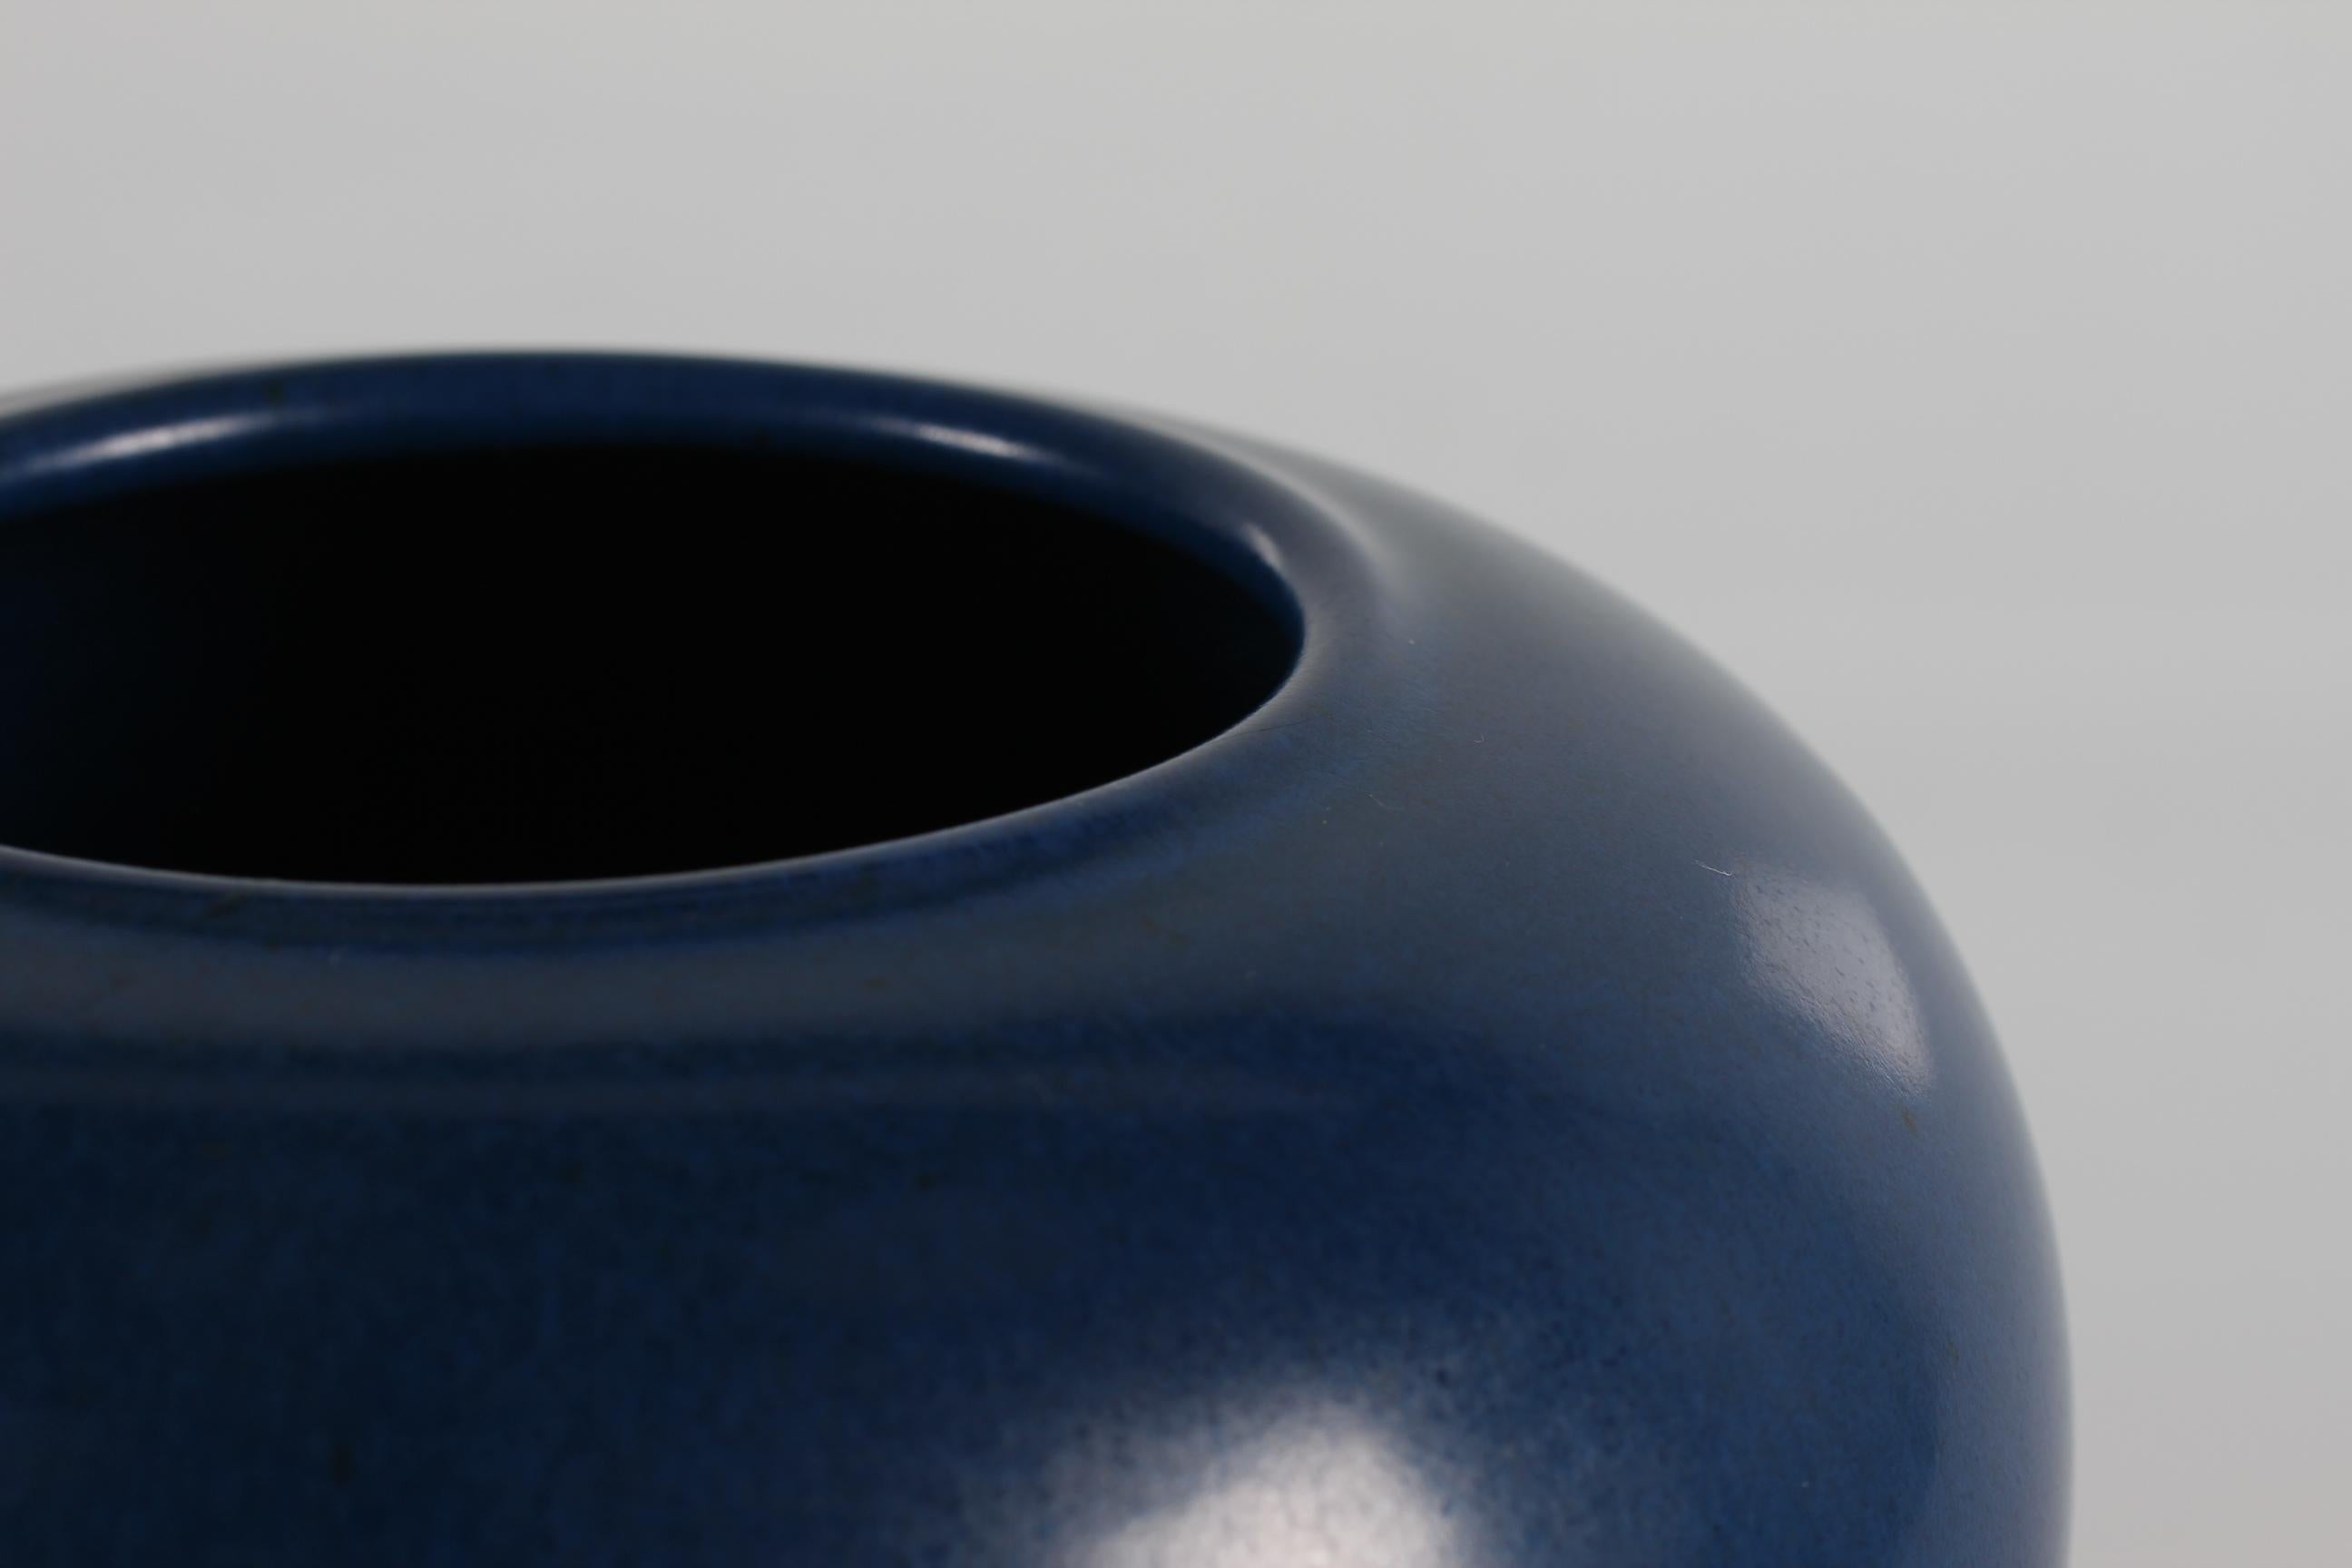 Large ceramic vase model no. 16 designed by the Danish ceramist Eva Stæhr-Nielsen (1911-1976) 
Hand turned and decorated by Saxbo ceramic workshop Denmark

The vase is decorated with cobalt blue satin glaze. 
With stamp form the period